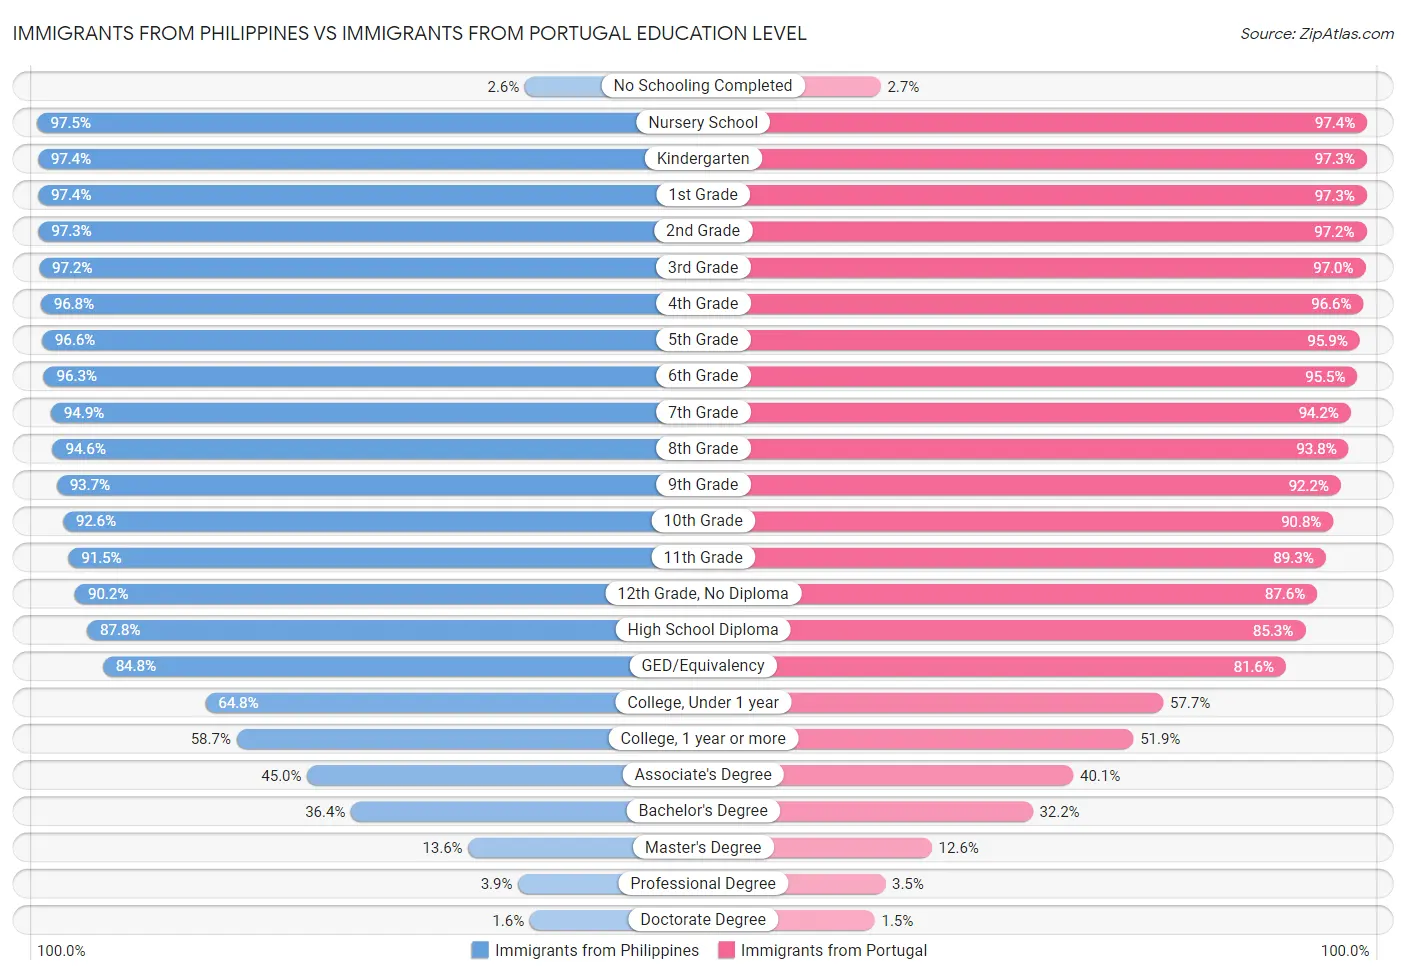 Immigrants from Philippines vs Immigrants from Portugal Education Level